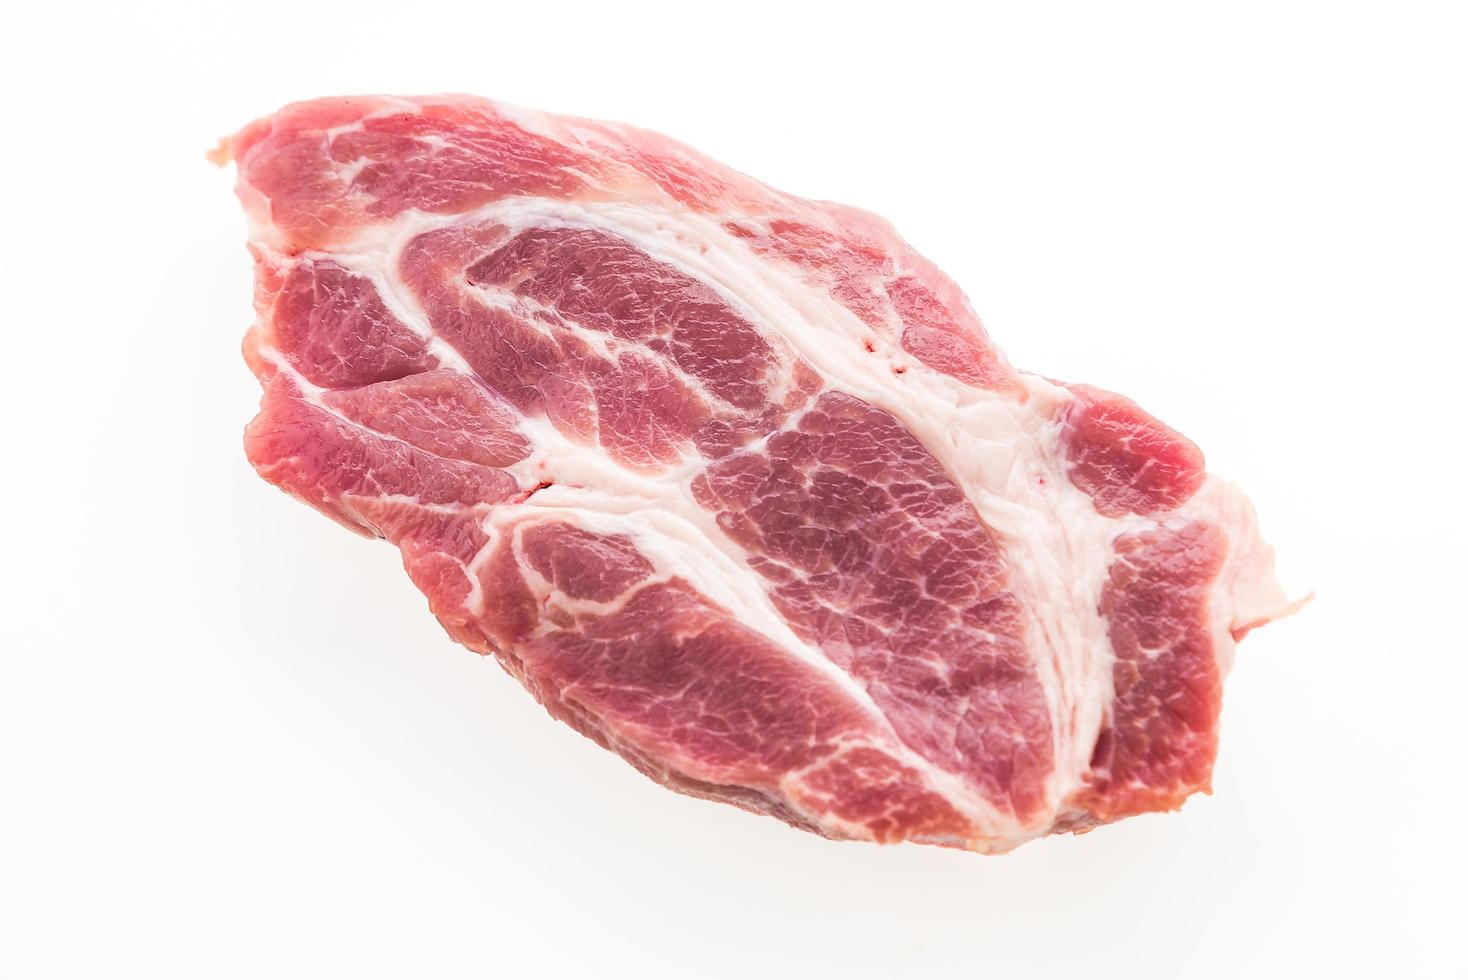 Raw pork meat isolated photo